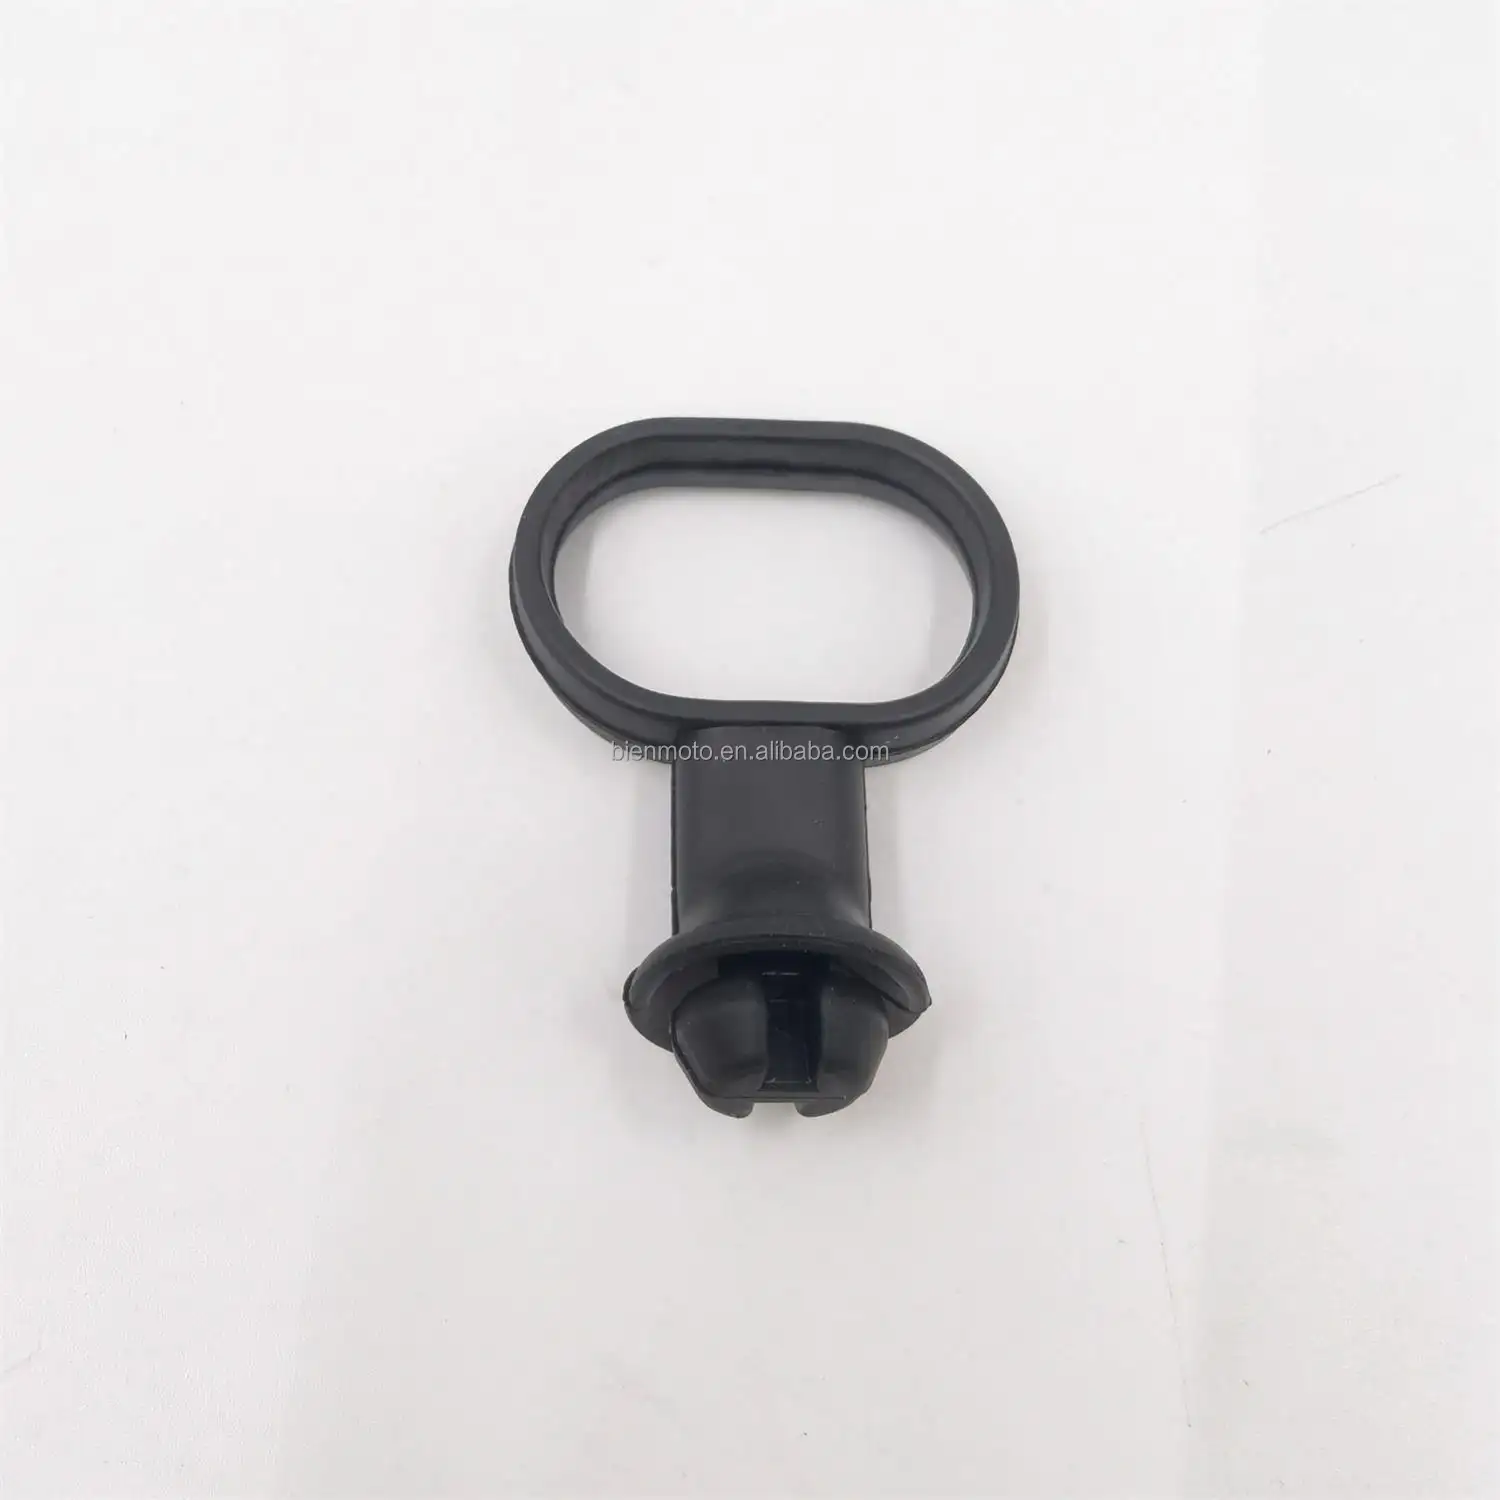 Motorcycle CG125 CBT125 CM125 GN125 GS125 GN250 speedometer cable holder clip For Honda Suzuki 125cc 250cc CG GN location parts